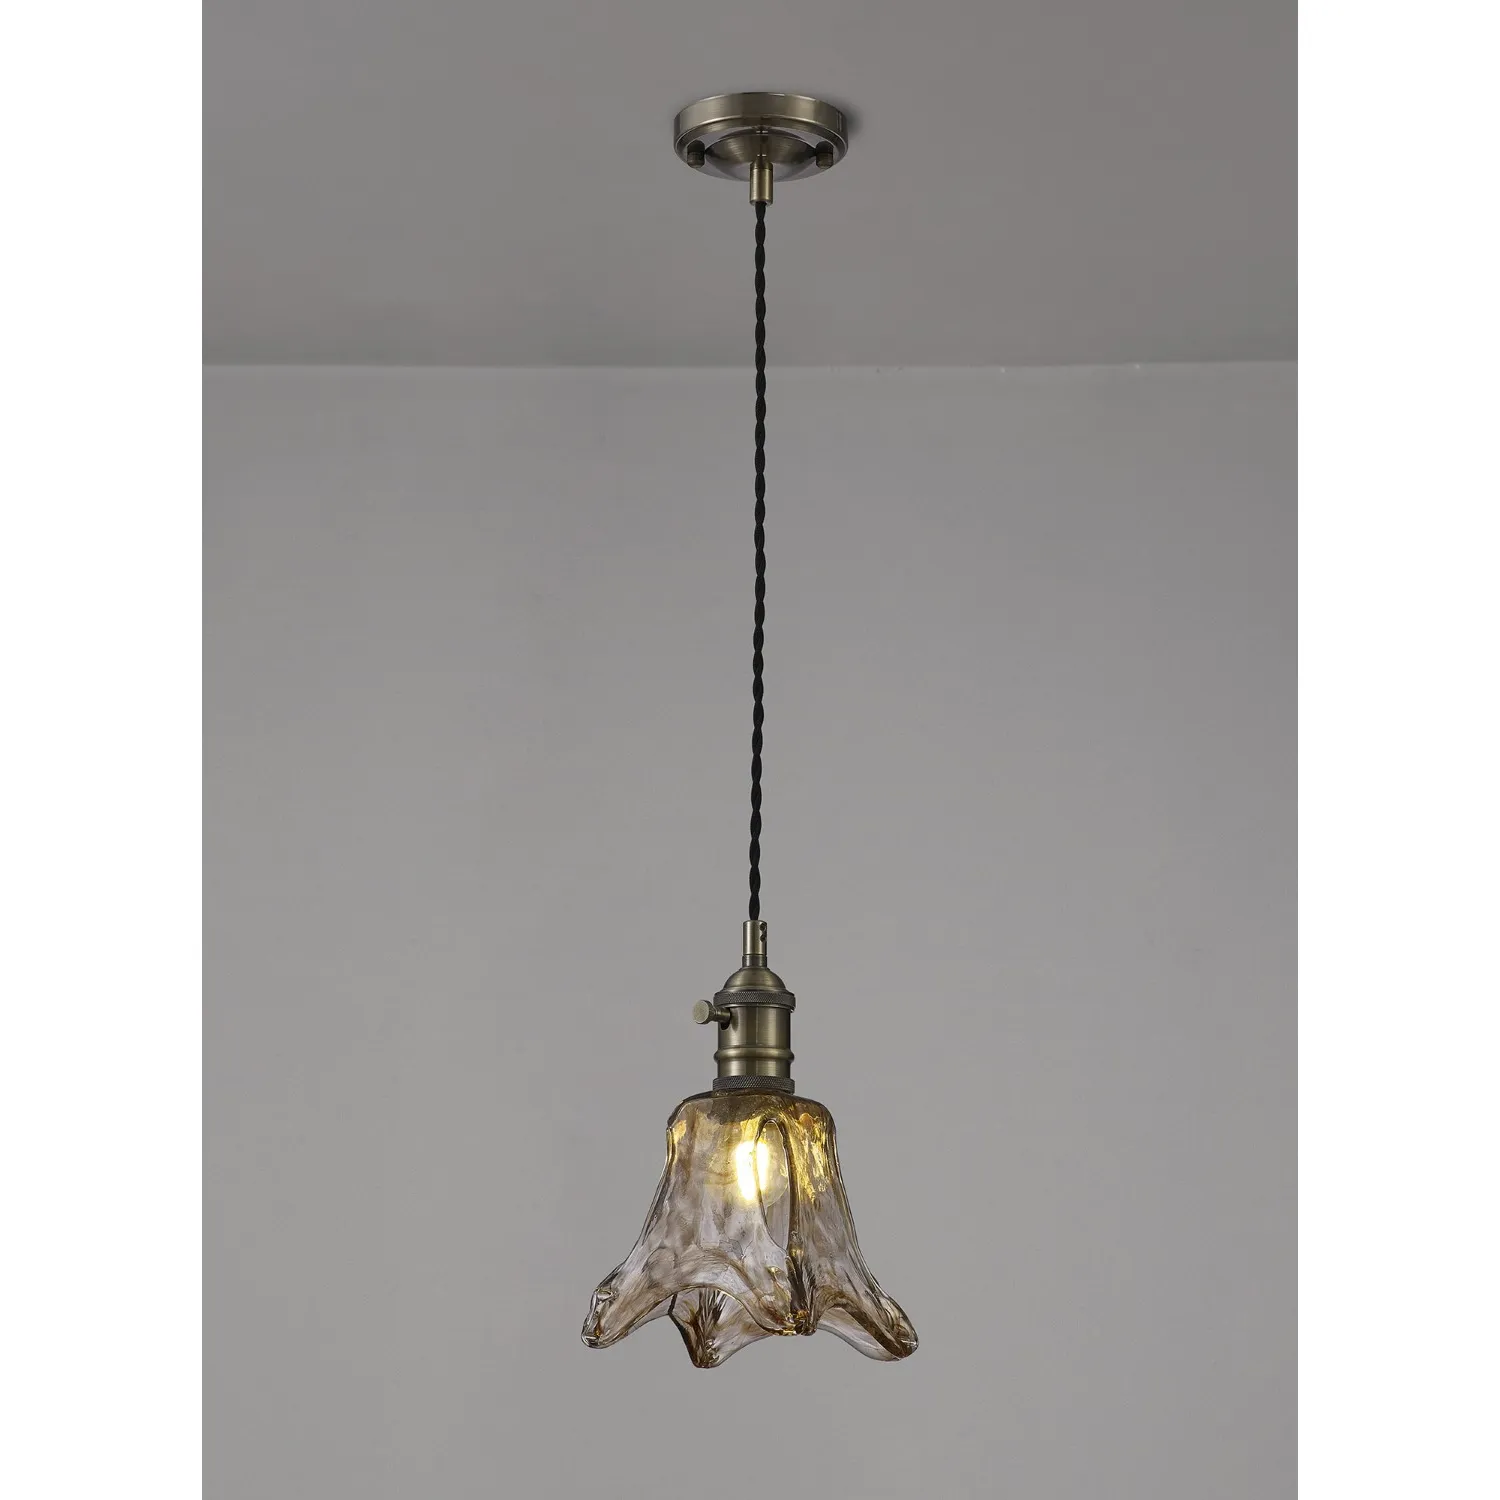 Hatfield Switched Pendant 1.5m, 1 x E27, Antique Brass Black Twisted Cable Brown Flower Glass